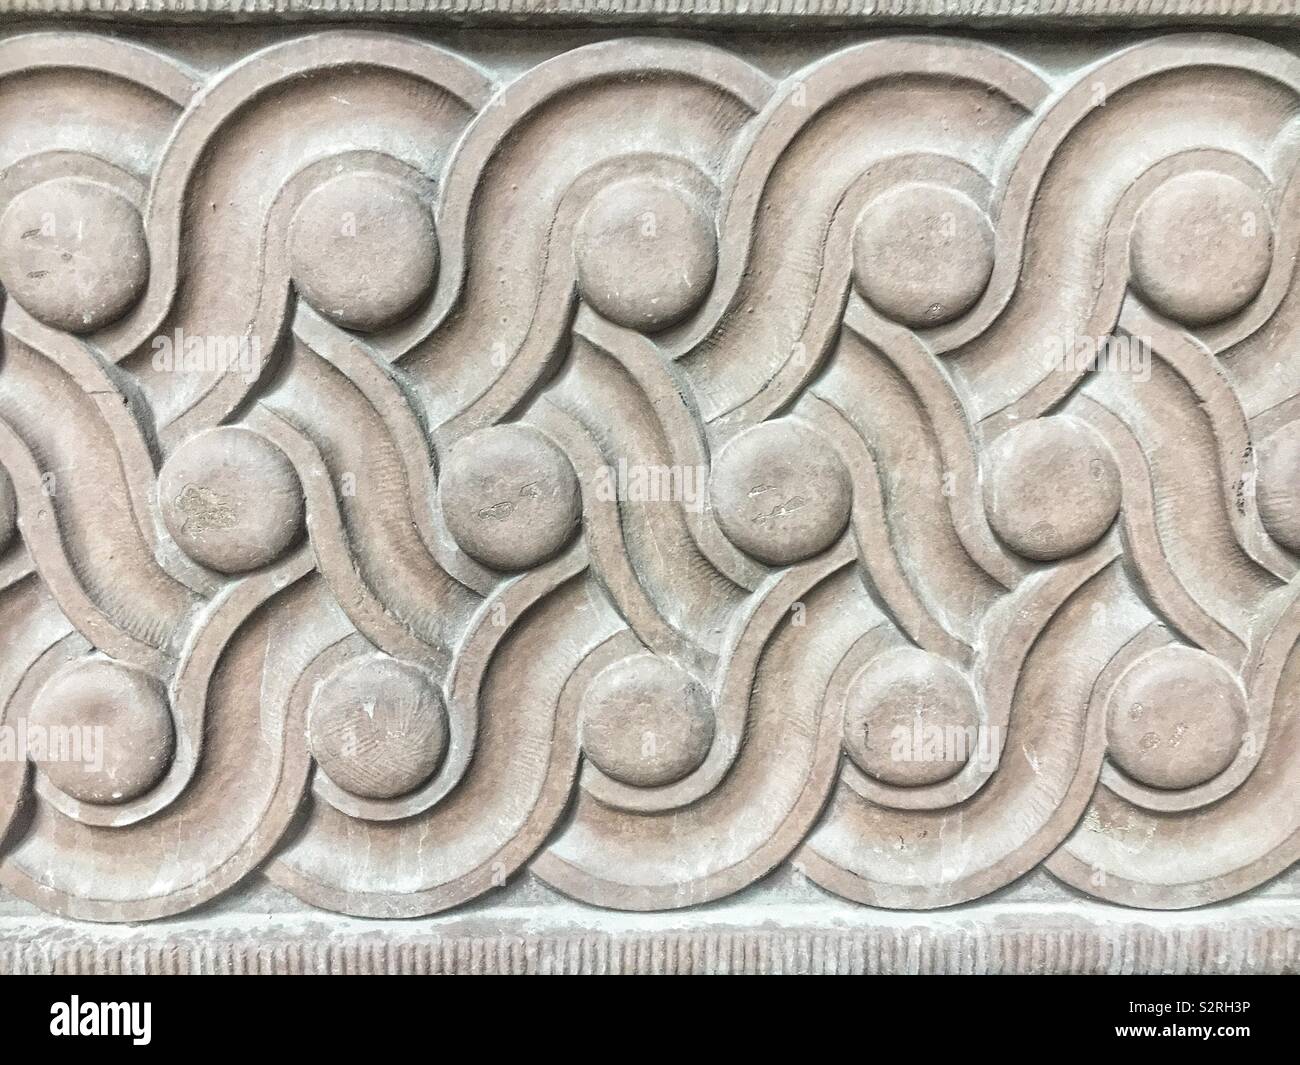 Concrete architectural detail of scrolls and circles in a repeating pattern. Stock Photo